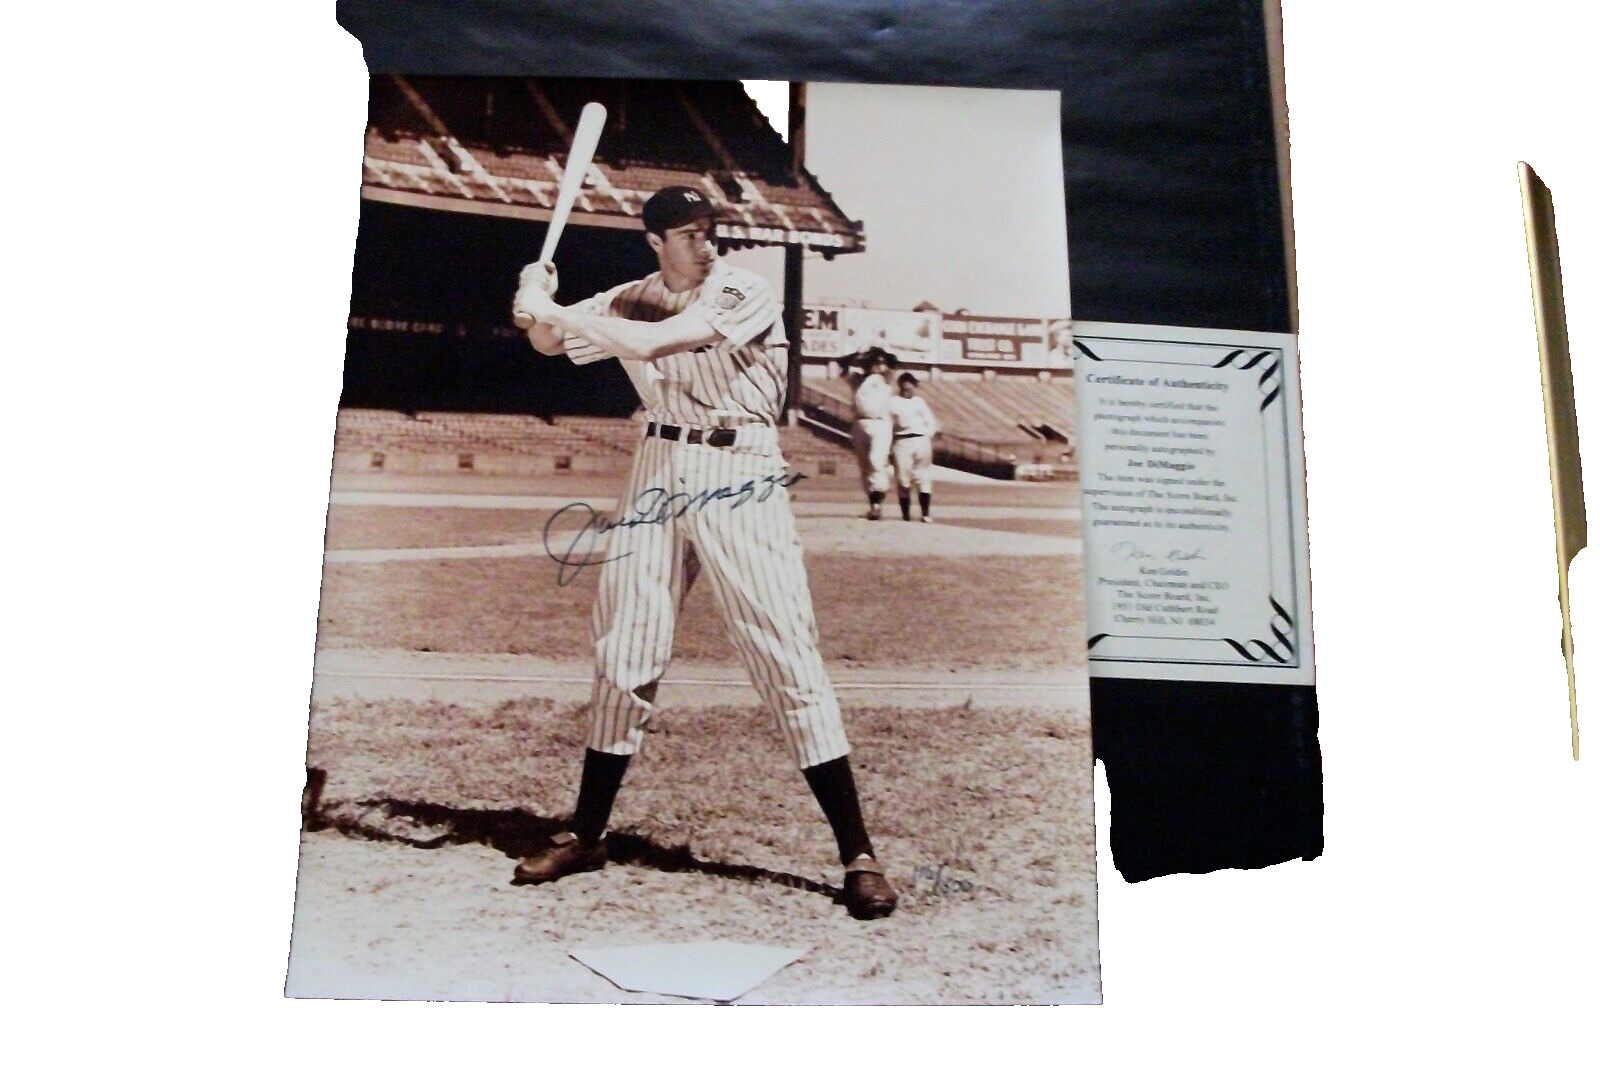 Joe Dimaggio NY Yank 11X14 Certified and numbered  #116 OF only 500 autographed